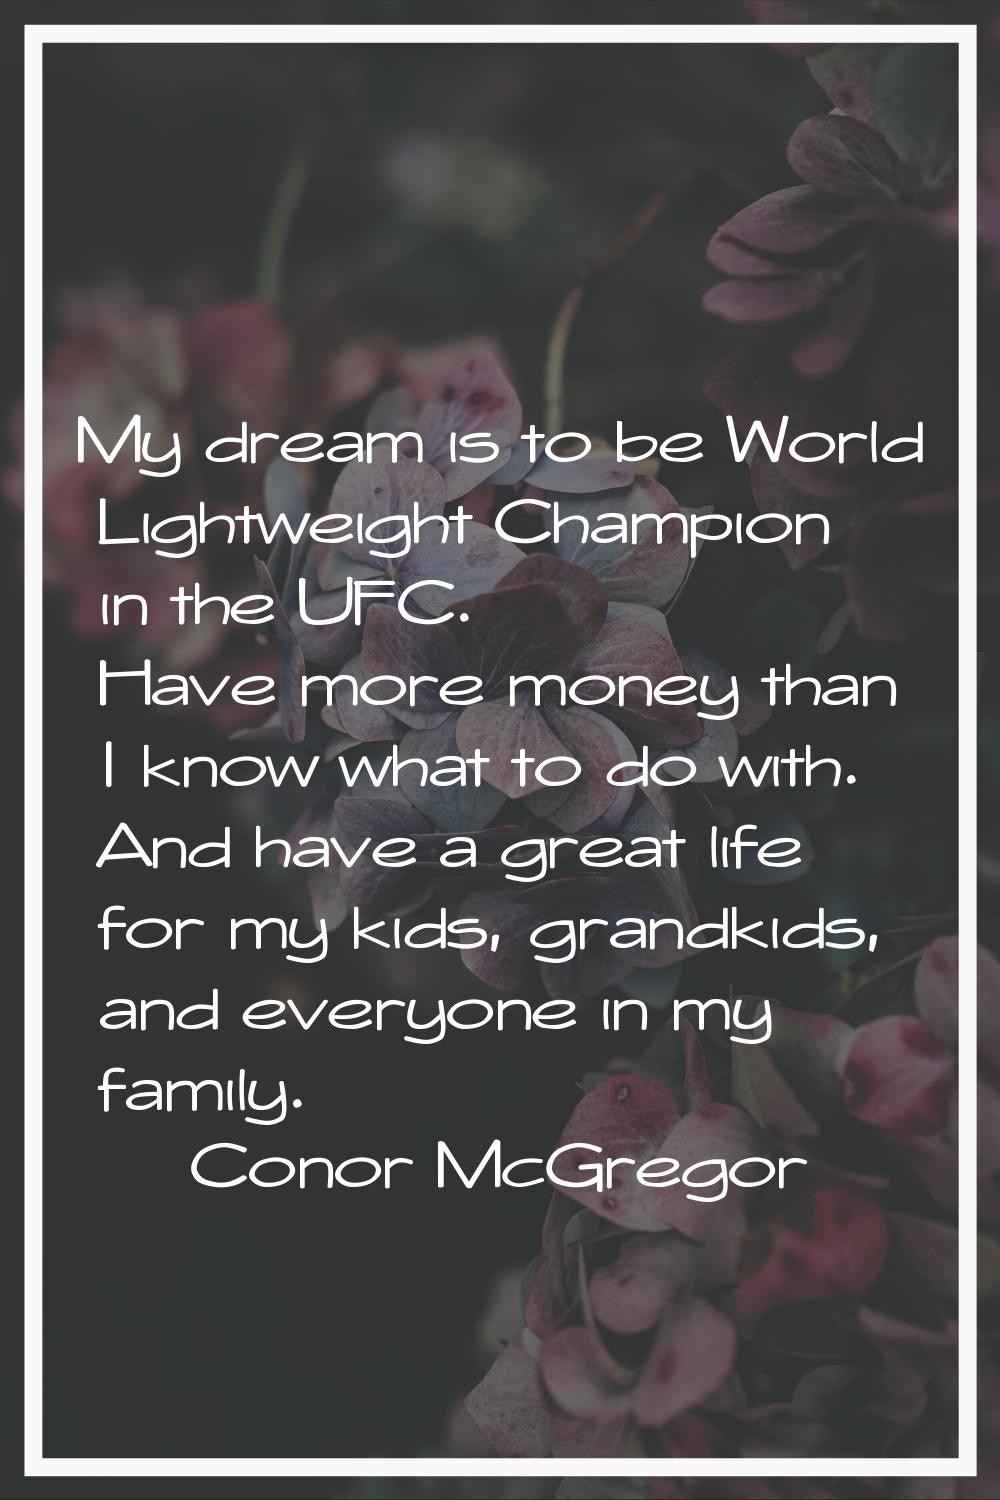 My dream is to be World Lightweight Champion in the UFC. Have more money than I know what to do wit